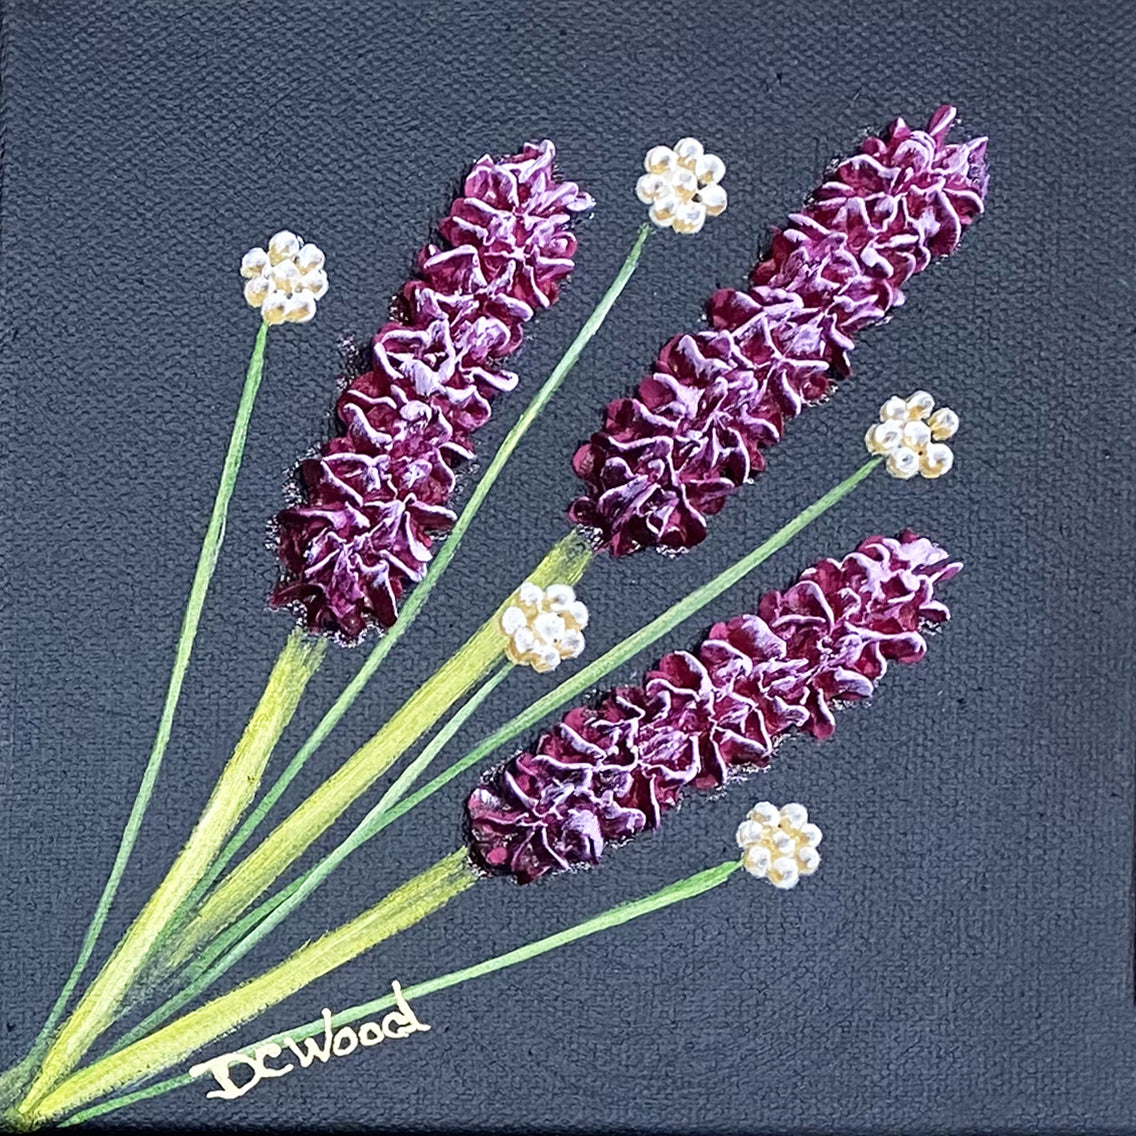 Small Works contemporary floral paintings by Denise Cassidy Wood of Northville, Mich. 